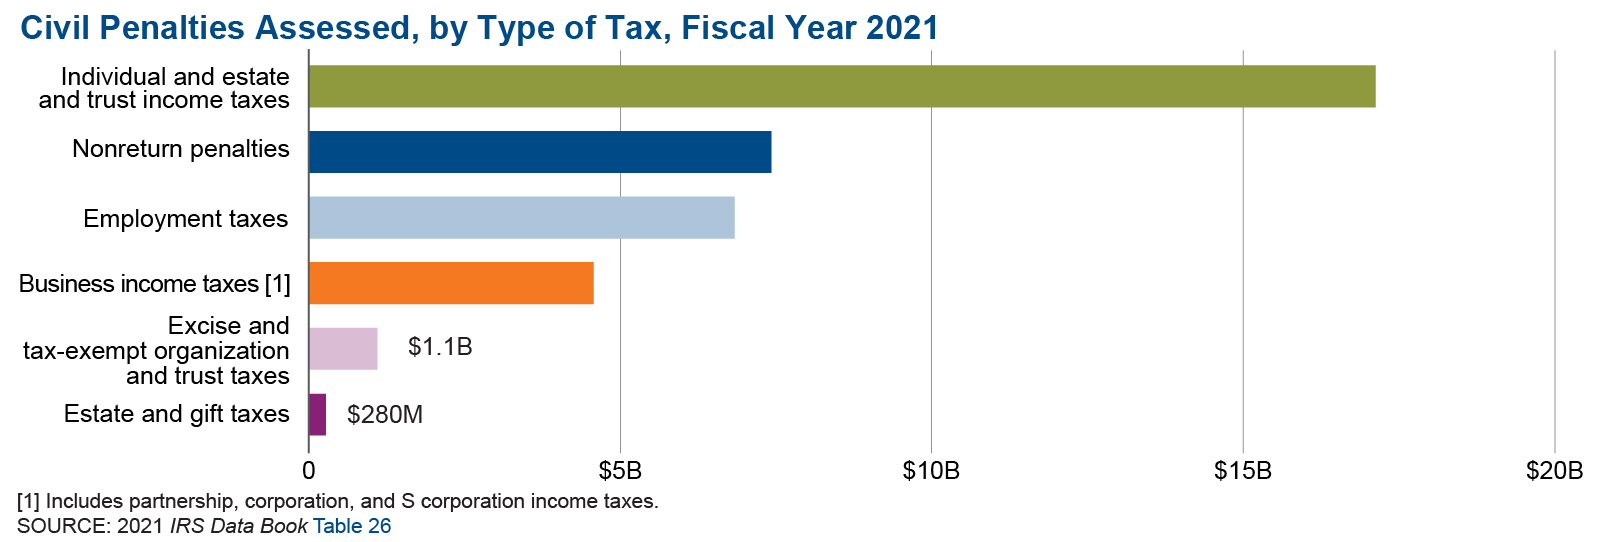 Graphic shows the amount of civil penalties assessed by the IRS in fiscal year 2021, a total of more than $37.3 billion. More than $17.1 billion was assessed on individual and estate and trust income tax returns; $4.5 billion was assessed on businesses.